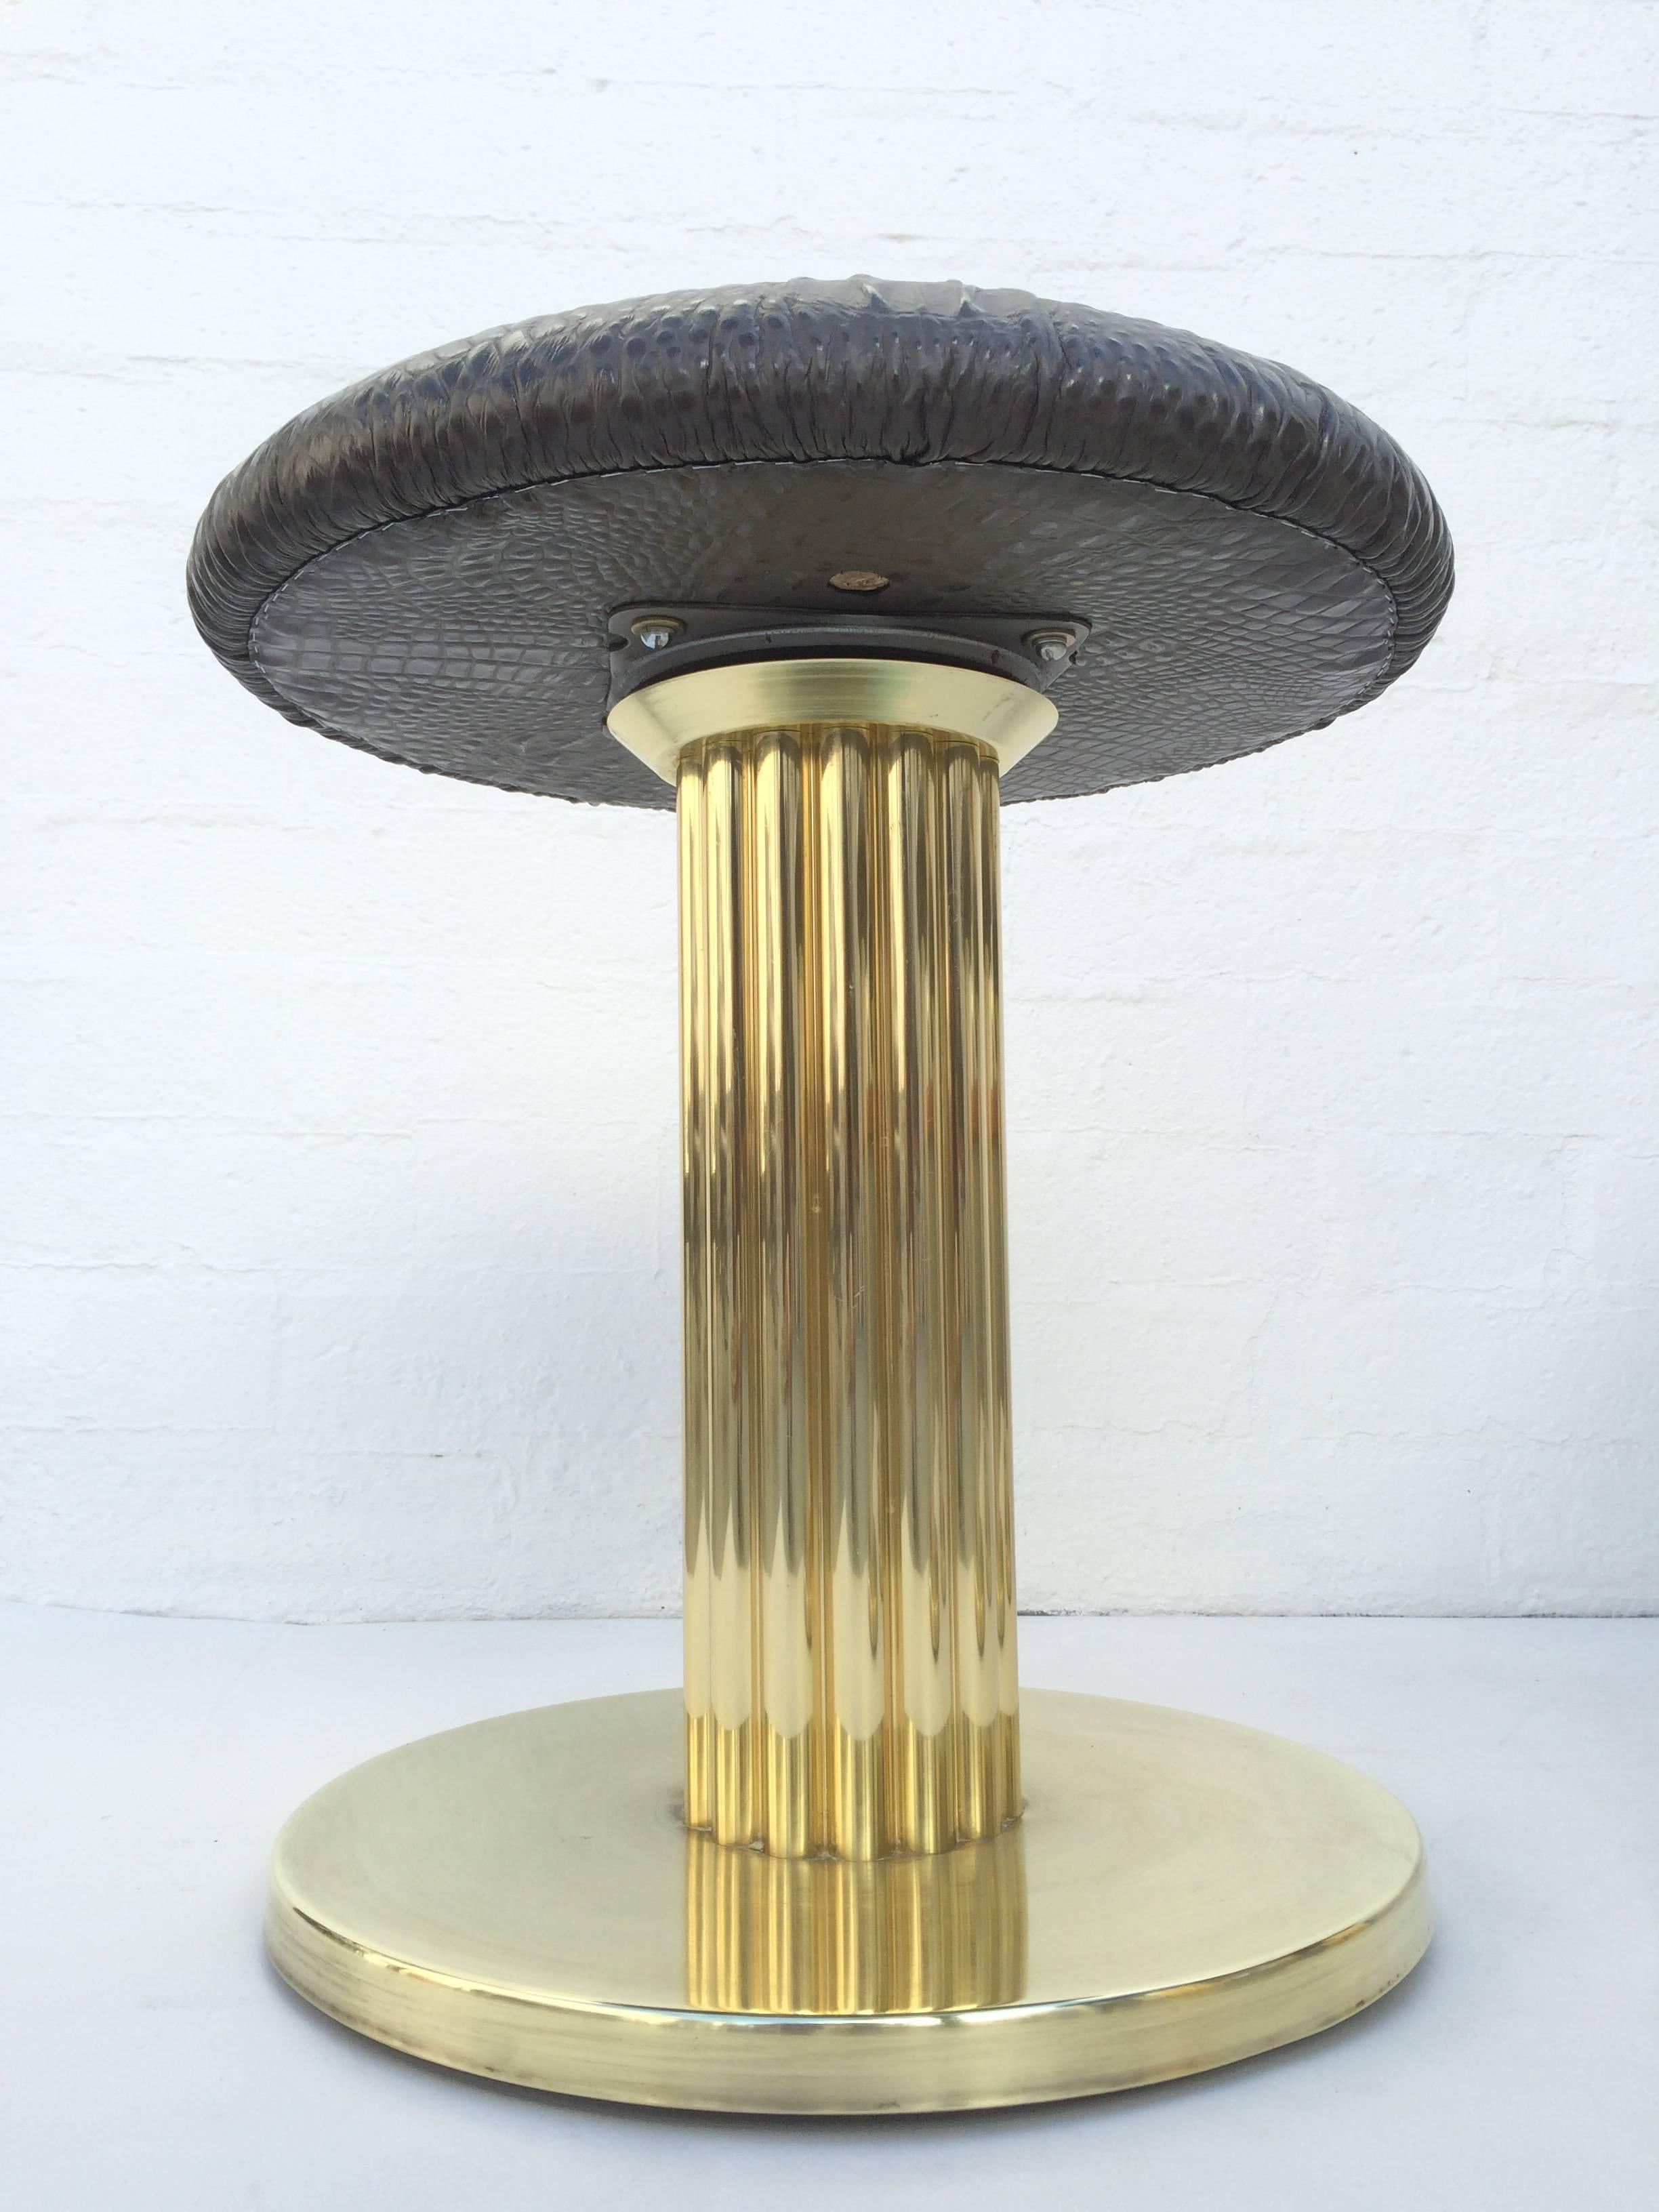 Late 20th Century Brass and Leather Swivel Stools by Design for Leisure Ltd